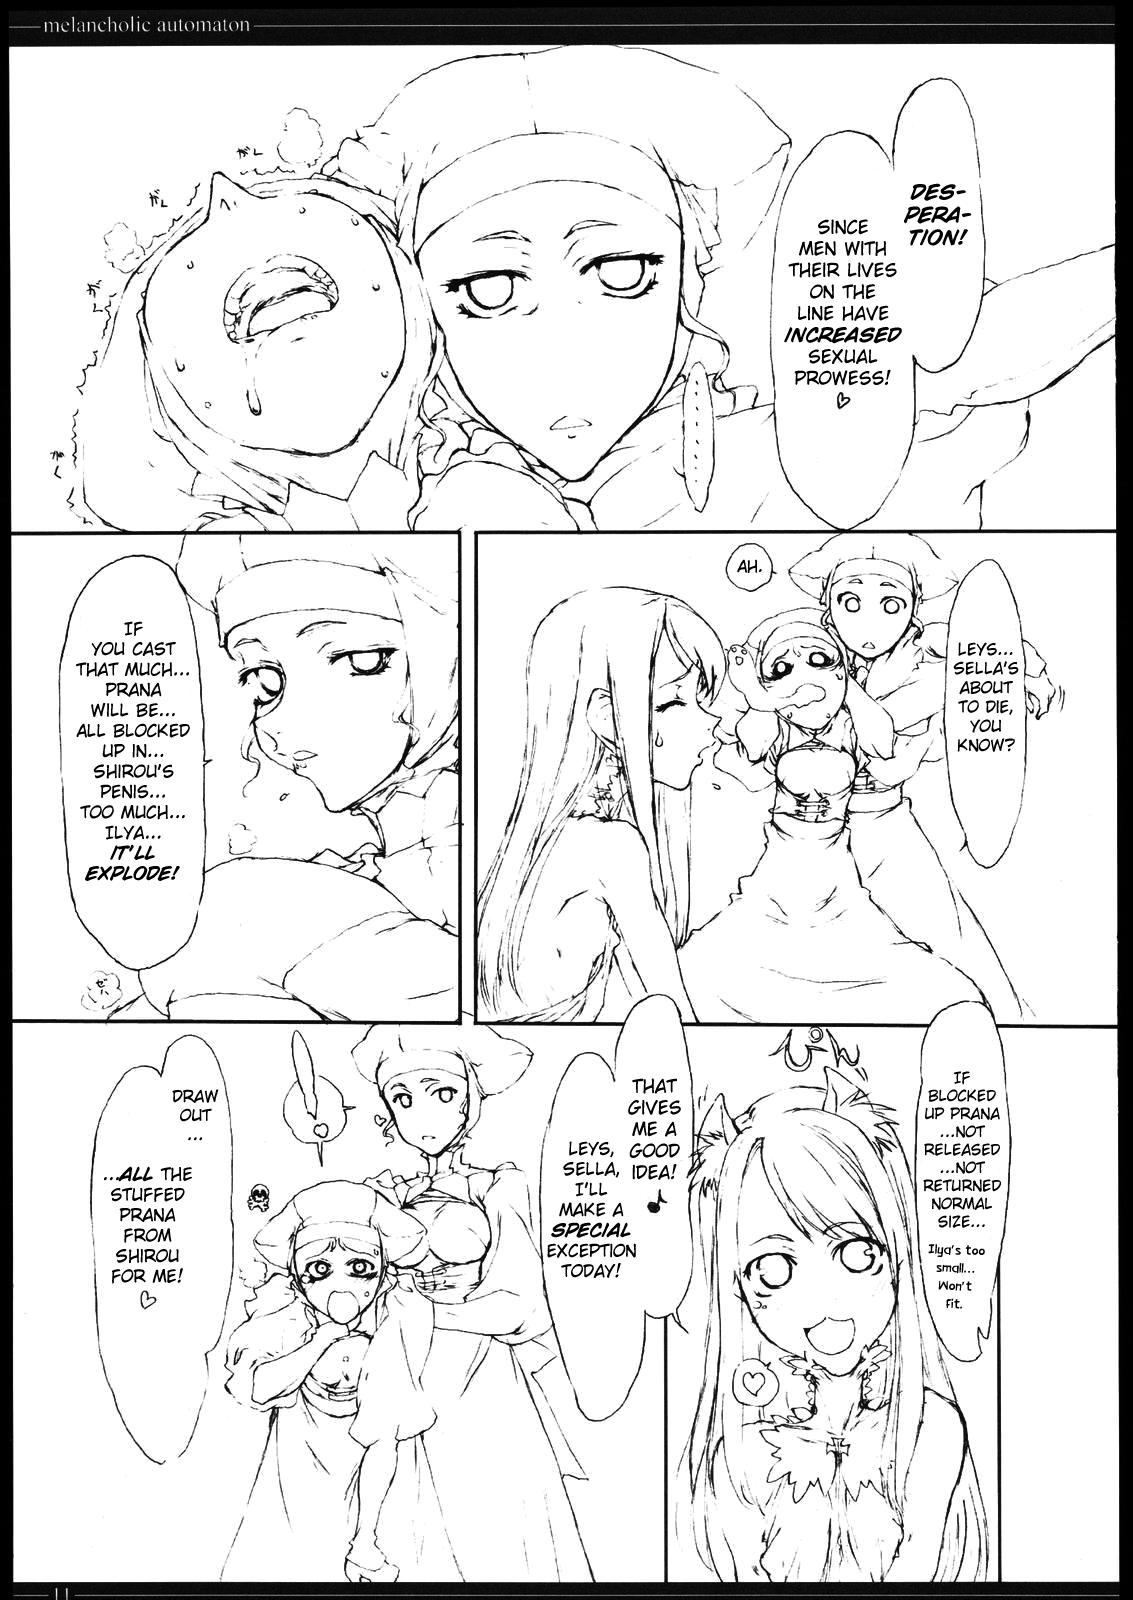 Submissive Melancholic Automaton - One day at the castle of Einzbern - Fate stay night Cruising - Page 10